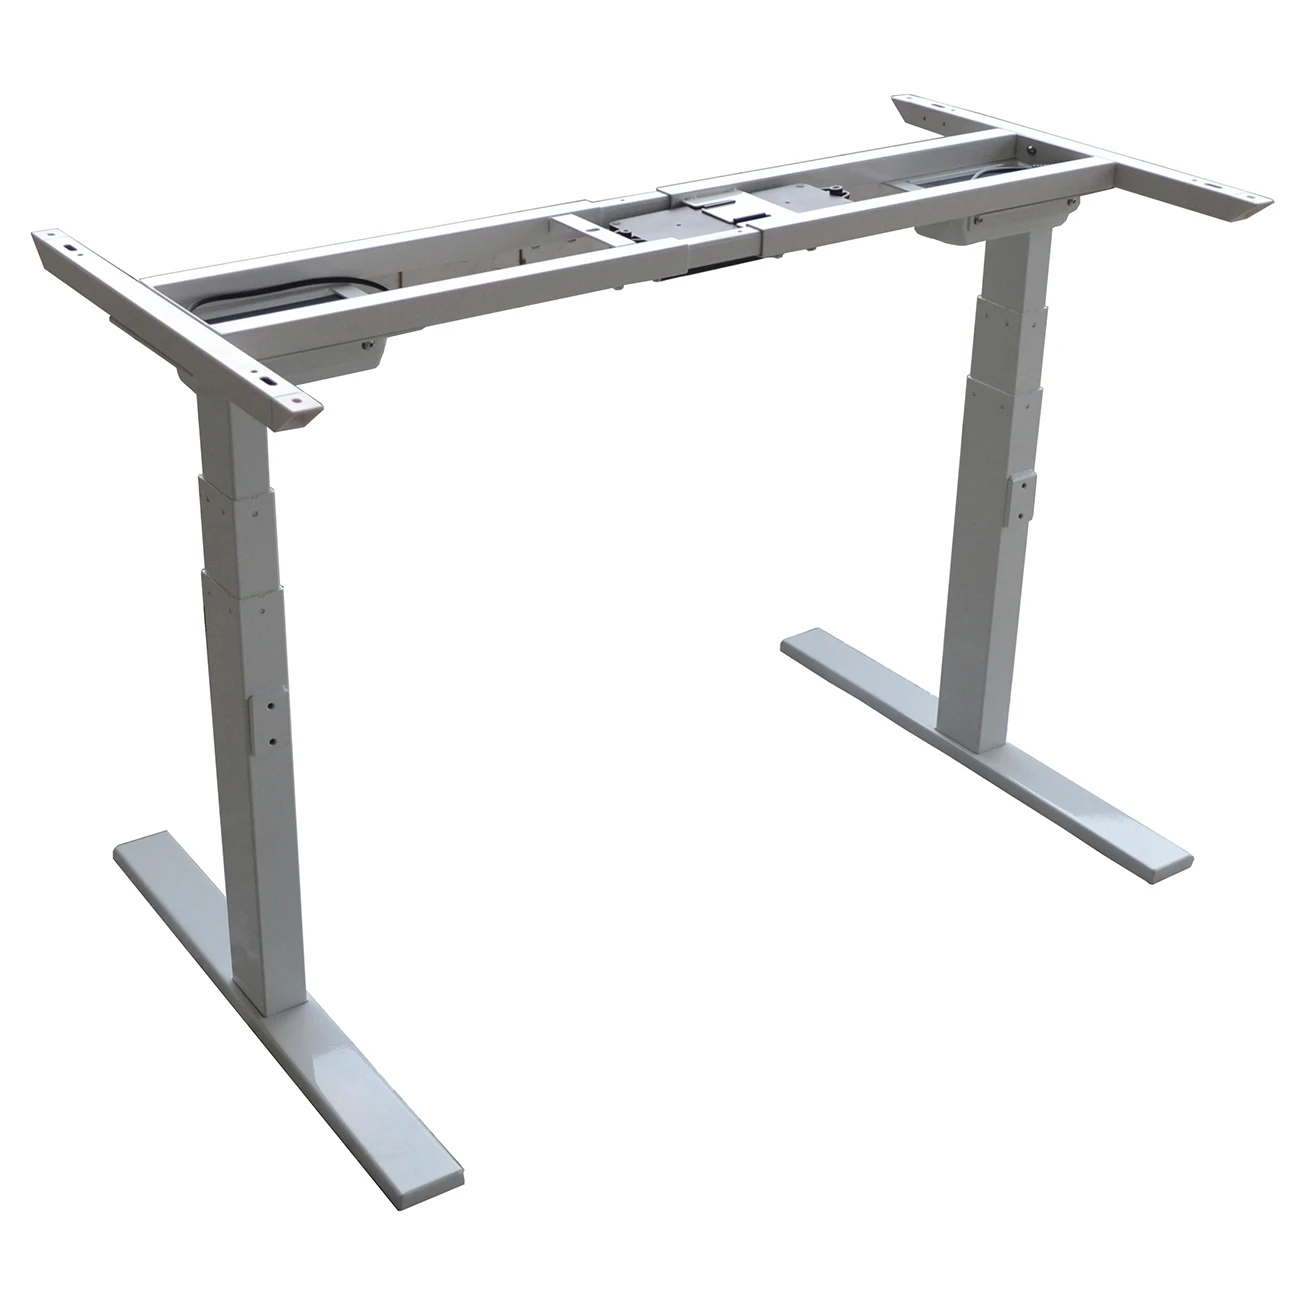 sit stand adjustable desk frame with electric lifting column with dual synchronous motor motorized metal adjustable desk legs